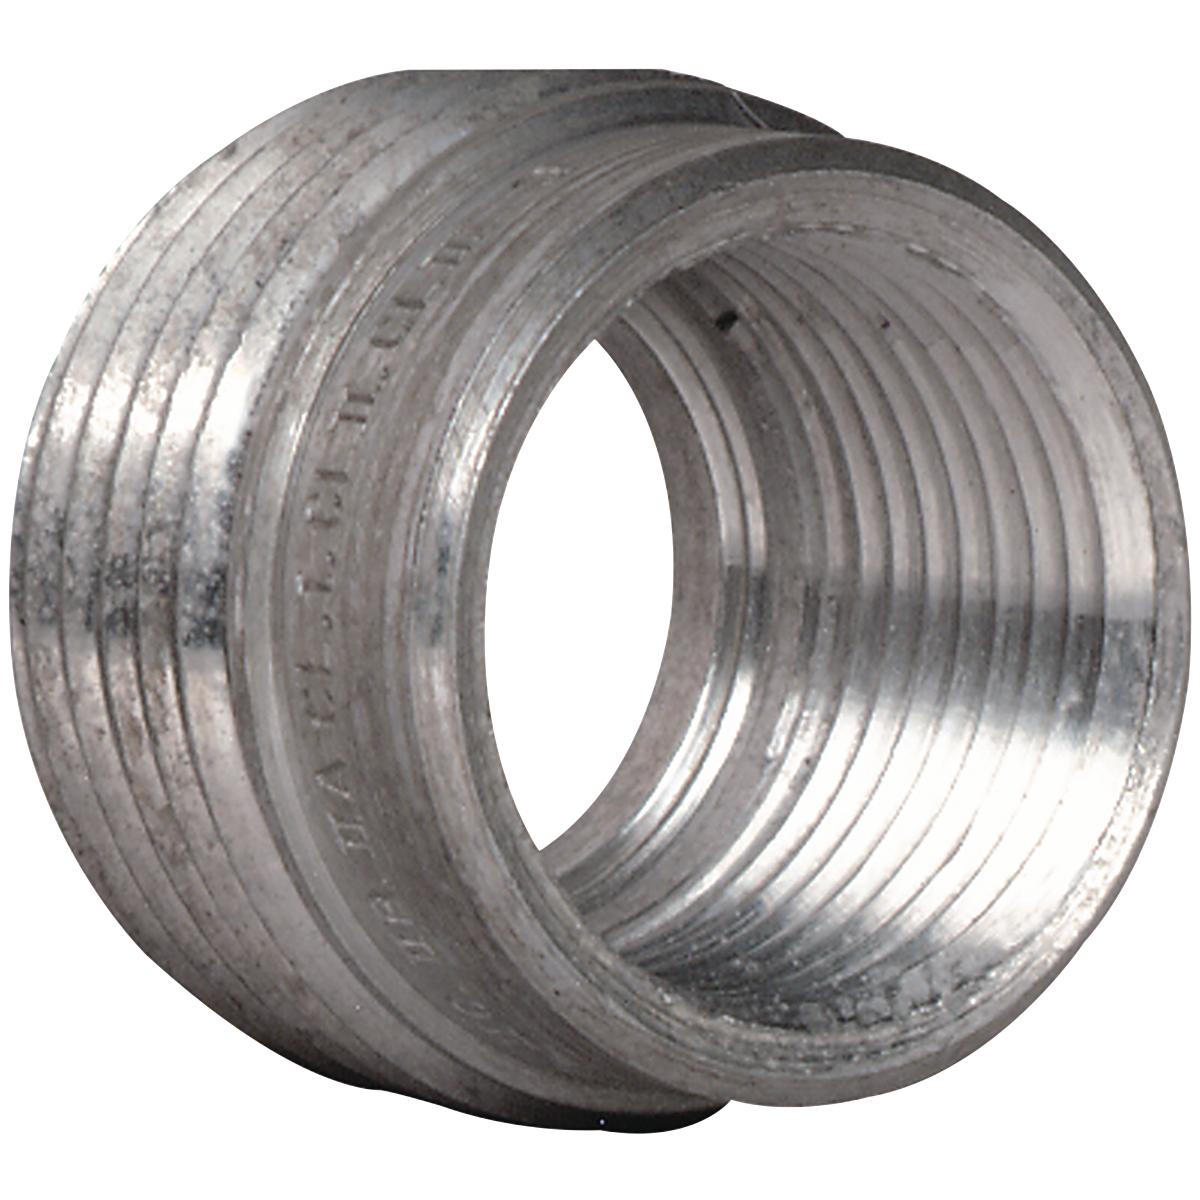 Hubbell R-10 1/2" to 3/8" Reducing Bushing, Aluminum  ; Tapered threads (NPT) ; Smooth internal bushing protects conductors ; Threaded for Rigid Conduit or IMC ; Killark’s reducing bushings and adapters assist in reducing the trade size of tapped holes and its smooth 